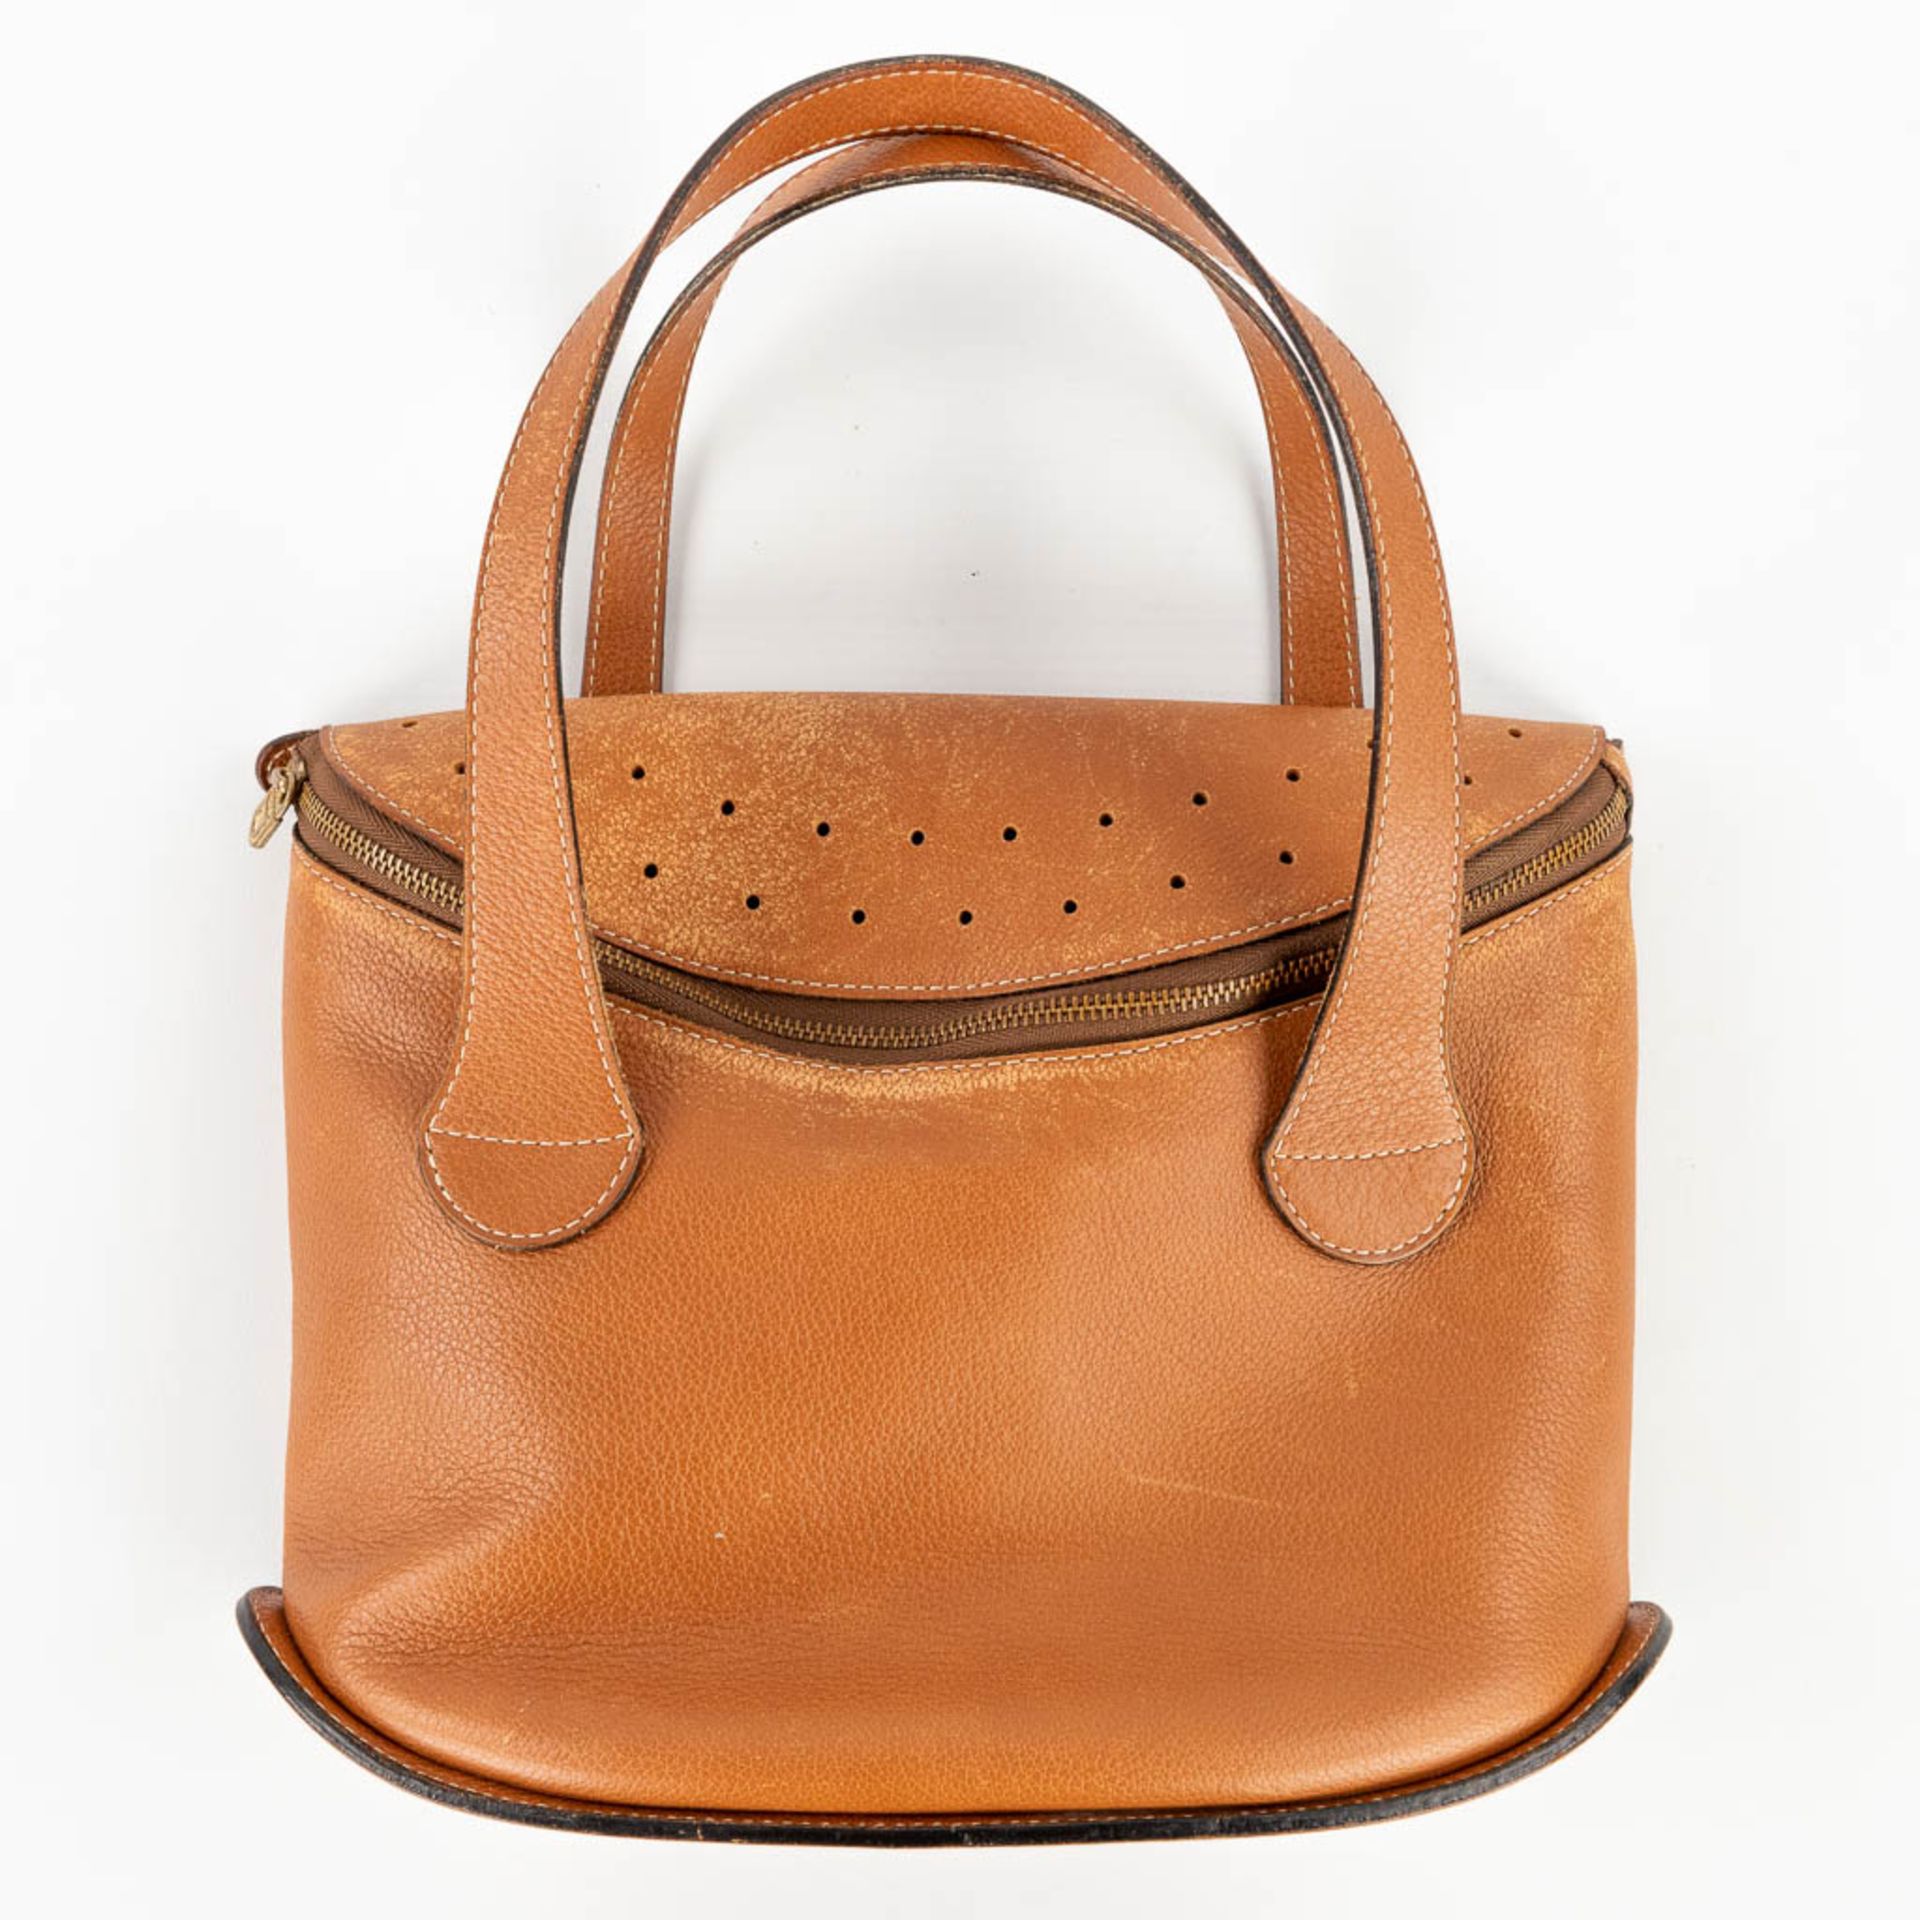 Delvaux Memoire PM, with the original purse, made of cognac-coloured leather. (L: 10 x W: 26 x H: 20 - Image 12 of 27